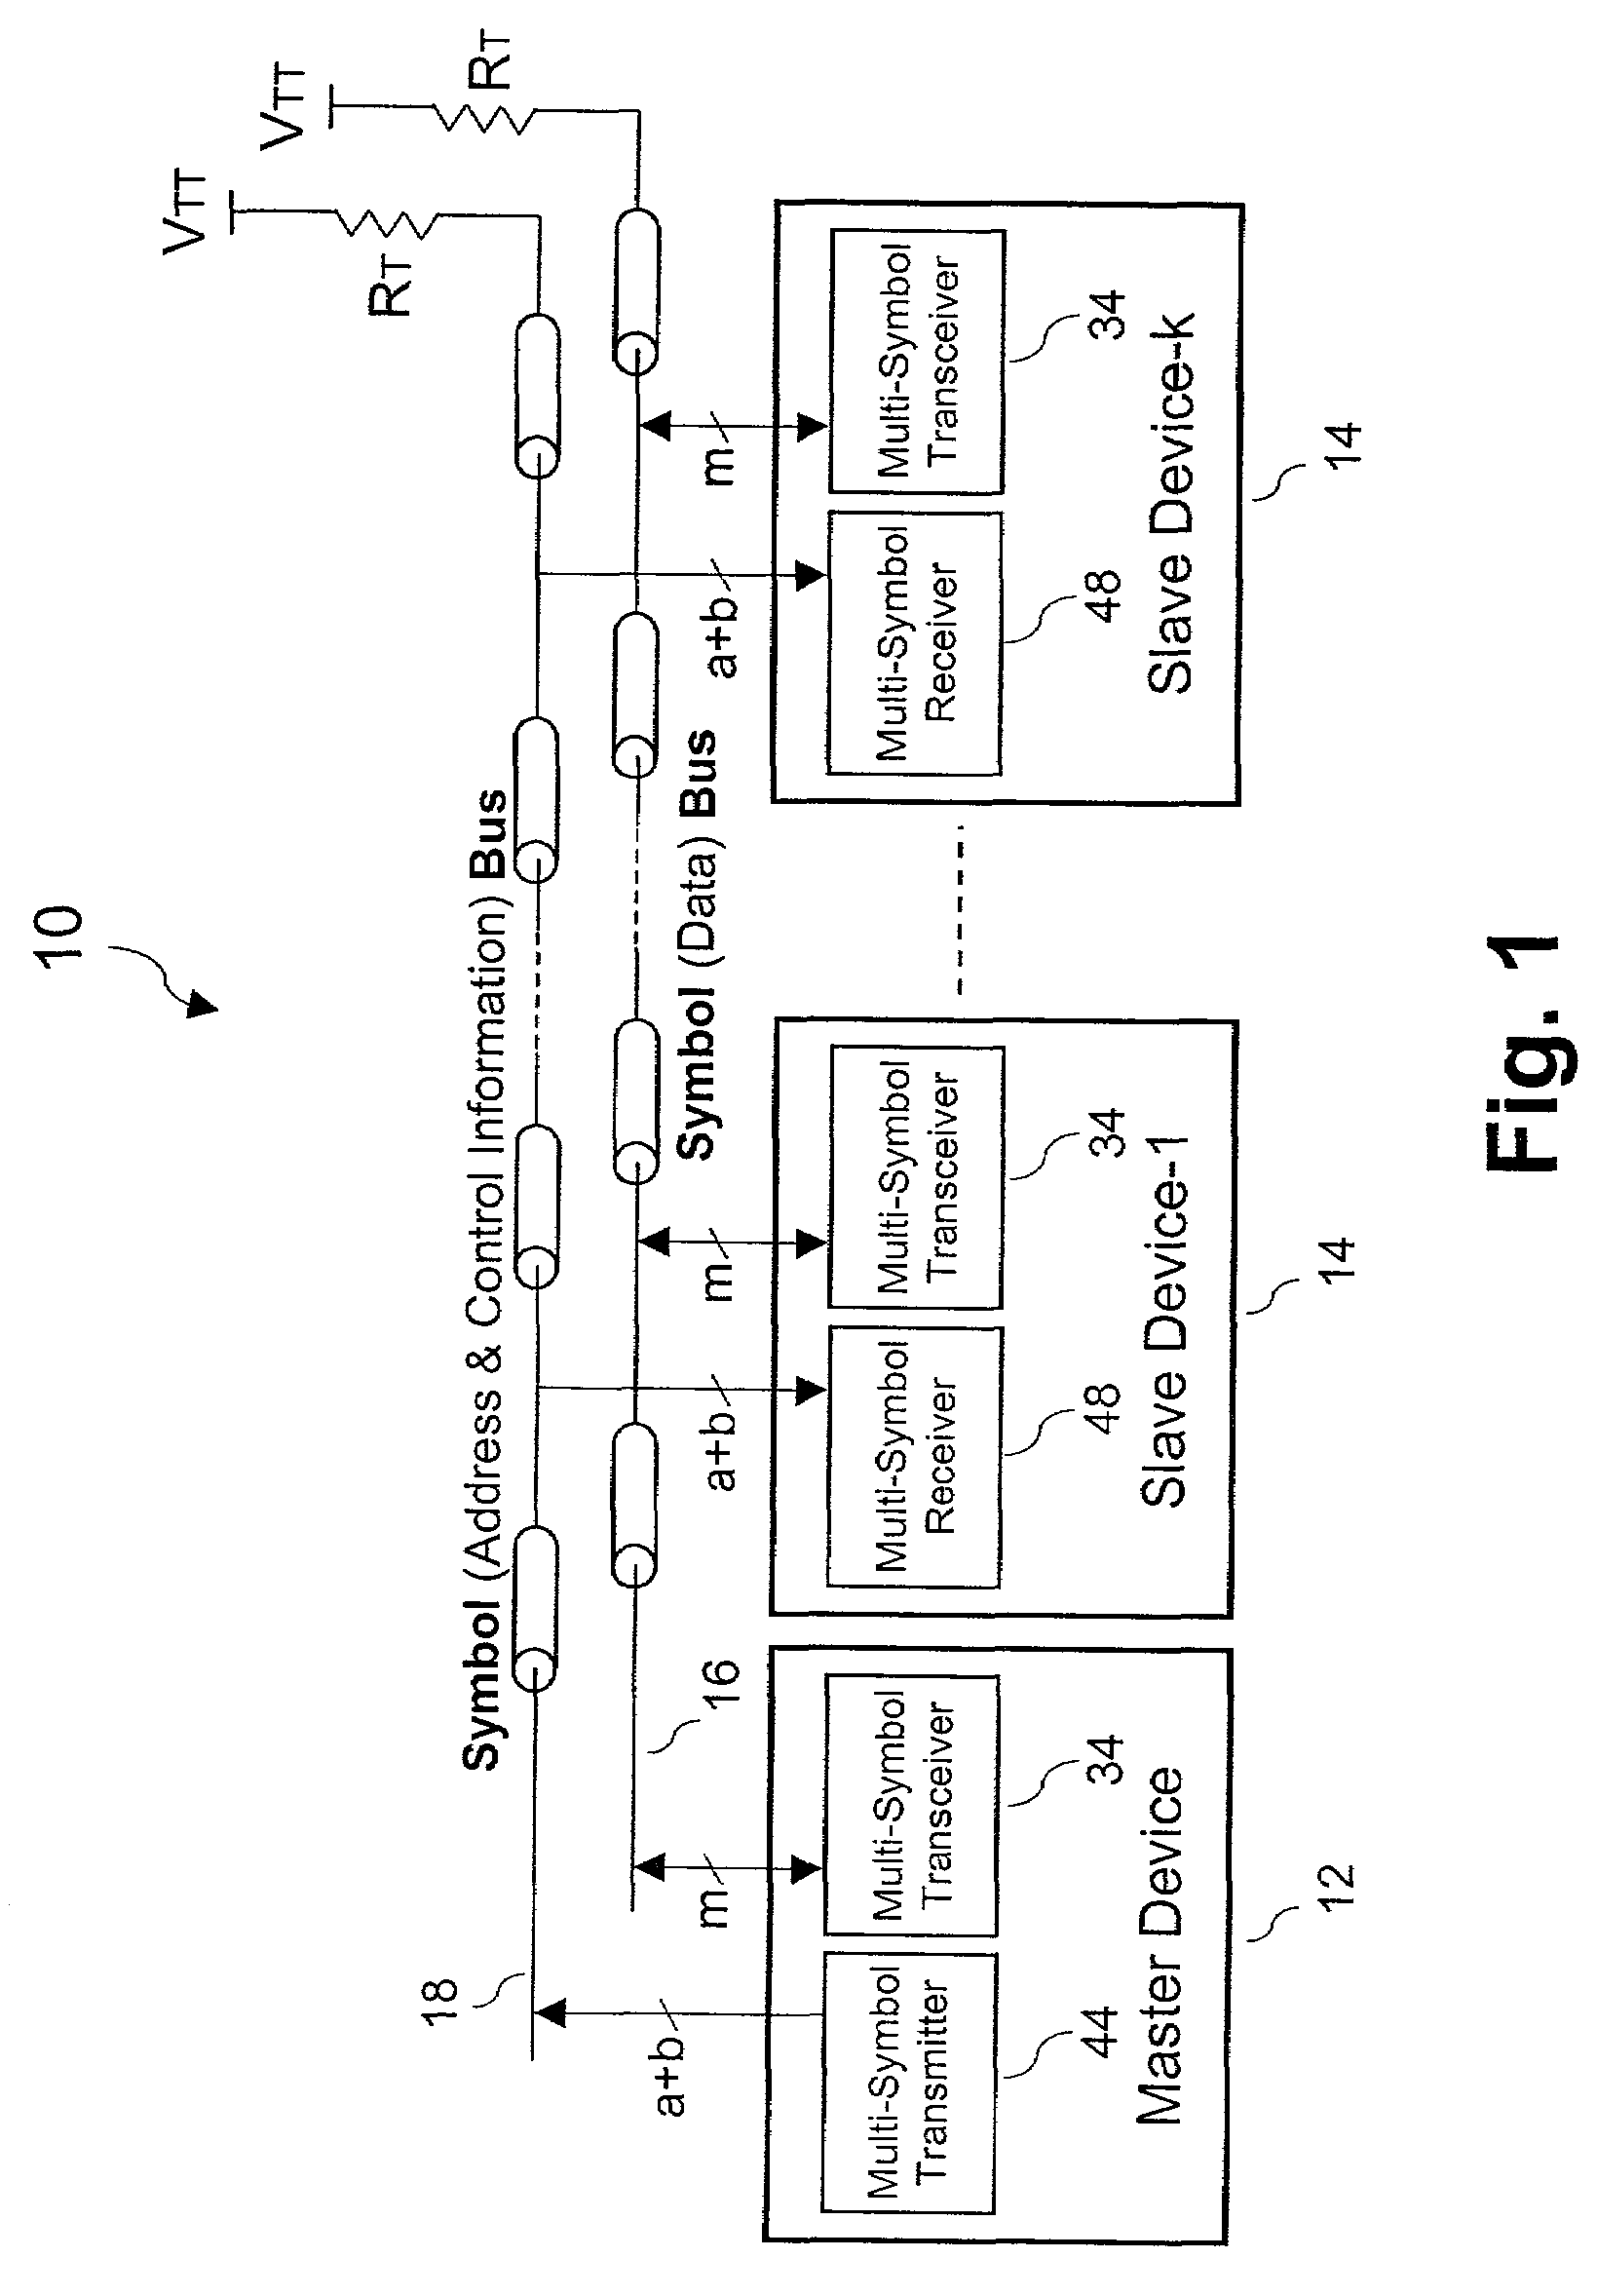 System and method for multi-symbol interfacing